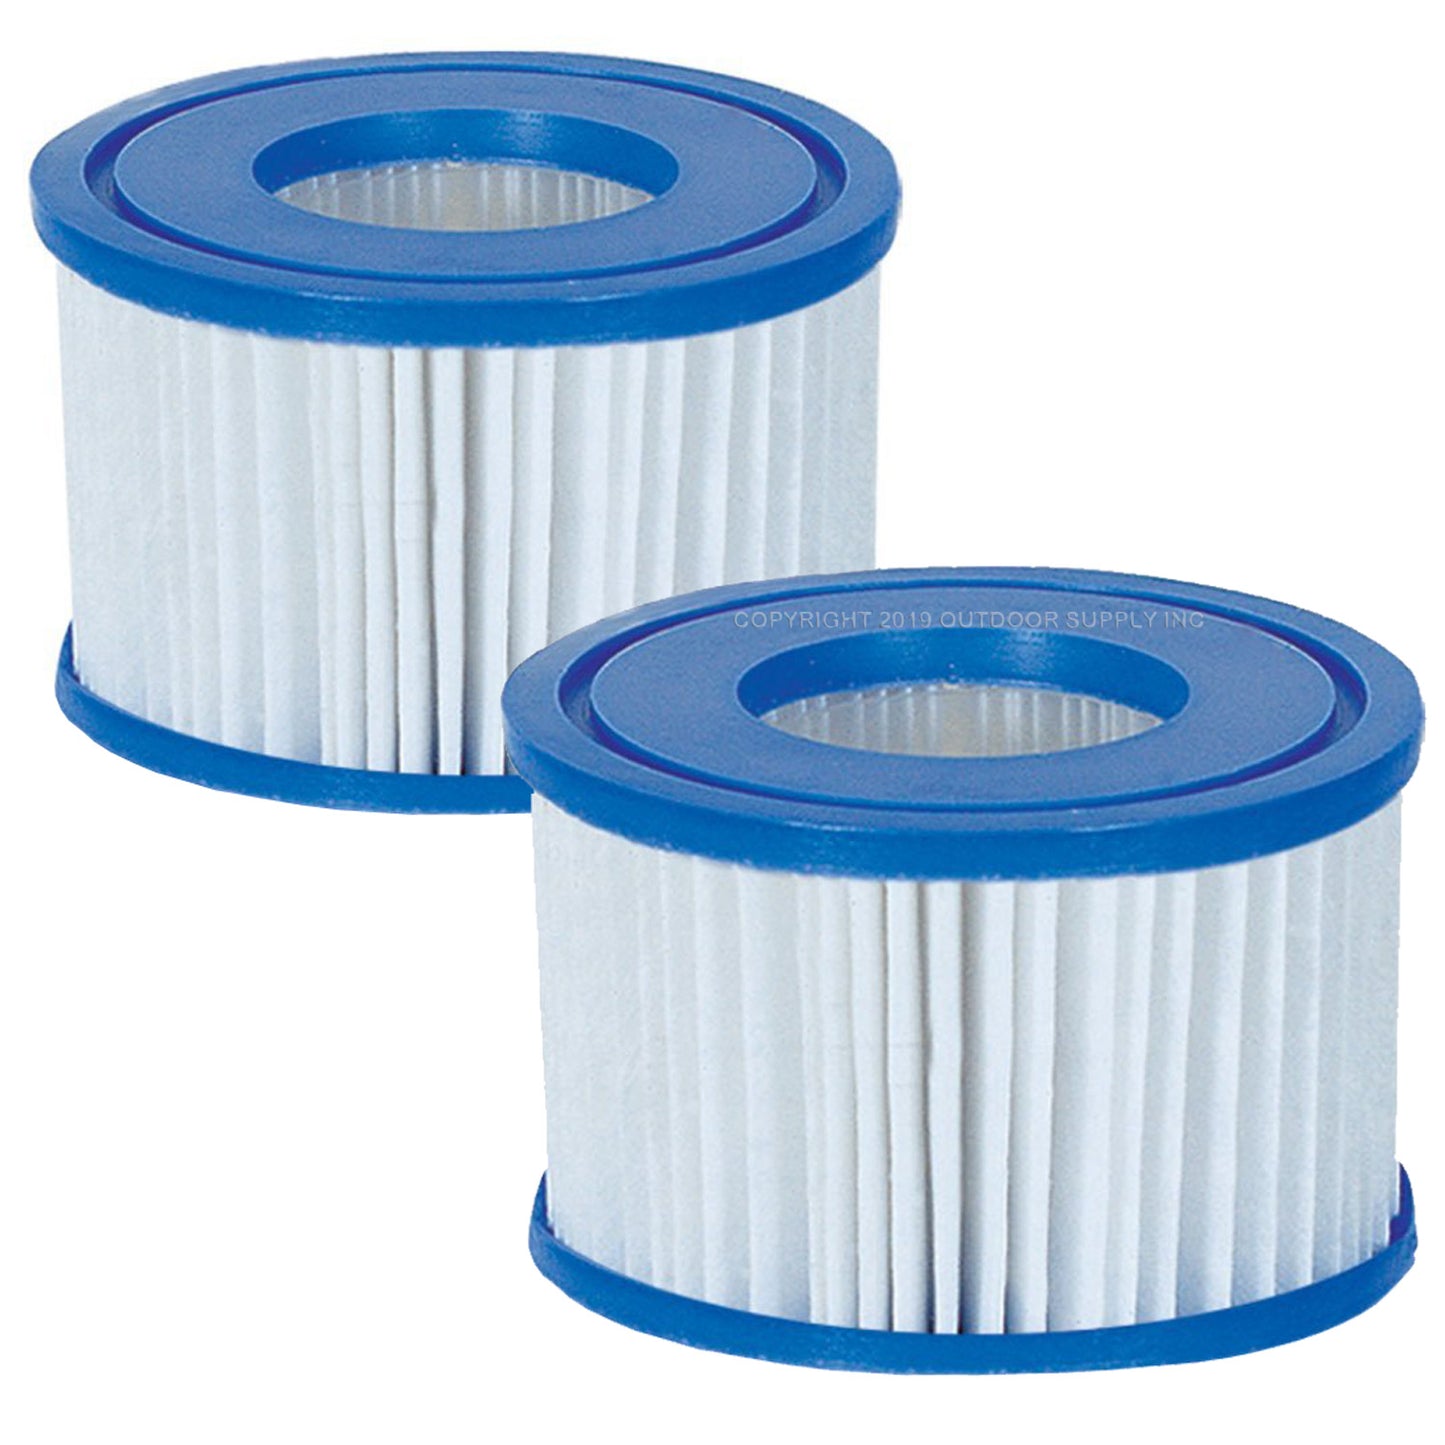 Bestway Type VI Spa Filter Cartridge for Lay-Z-Spa Twin Pack 58323